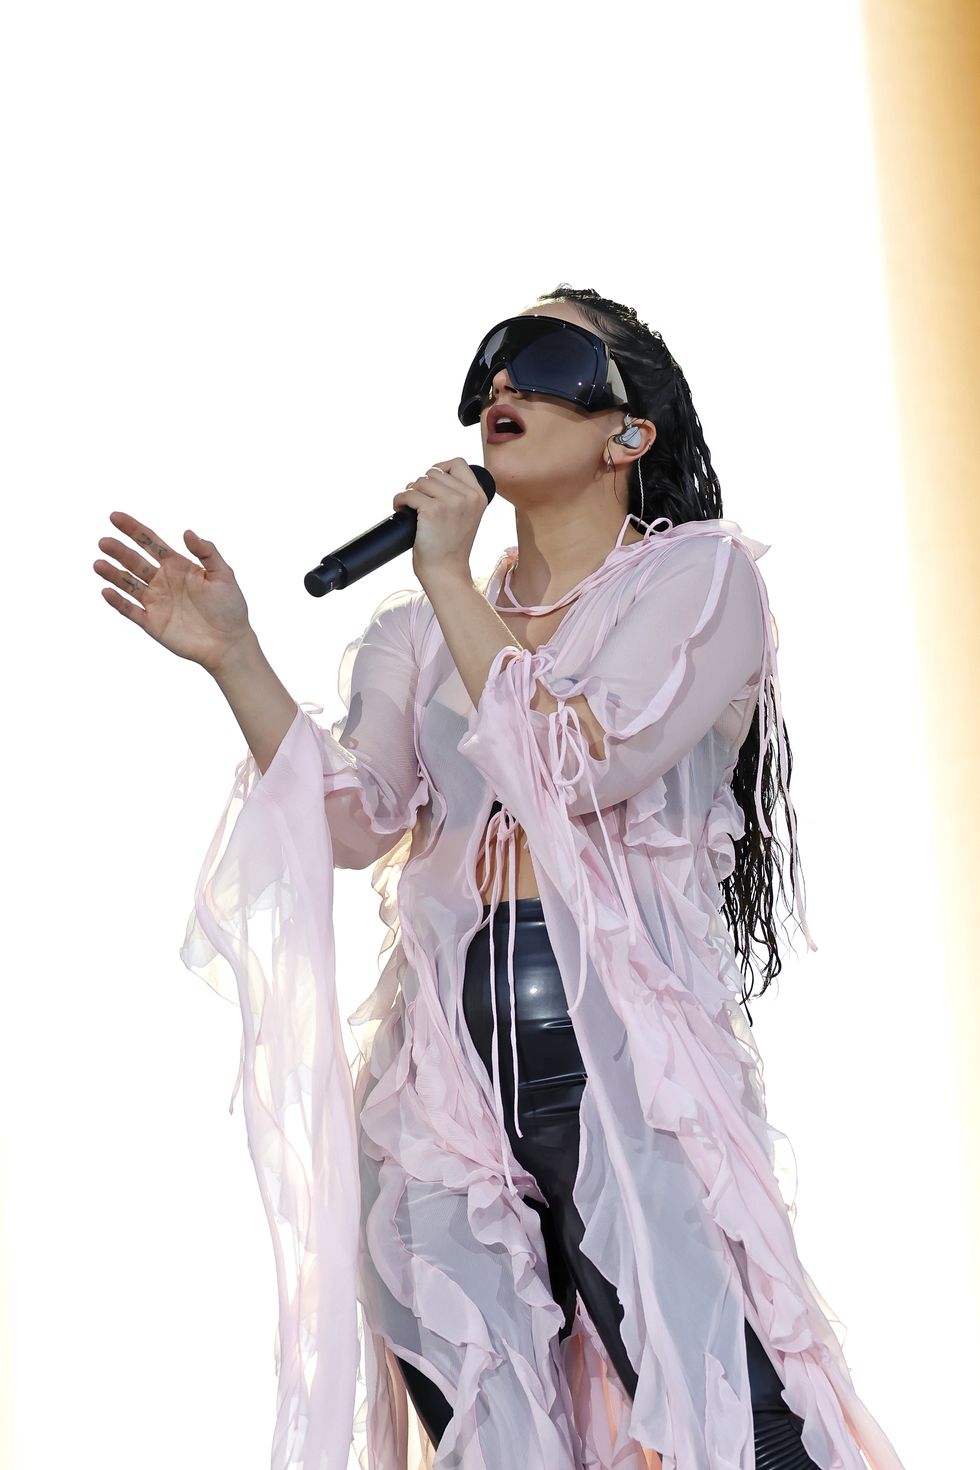 indio, california april 15 rosalía performs at the coachella stage during the 2023 coachella valley music and arts festival on april 15, 2023 in indio, california photo by frazer harrisongetty images for coachella